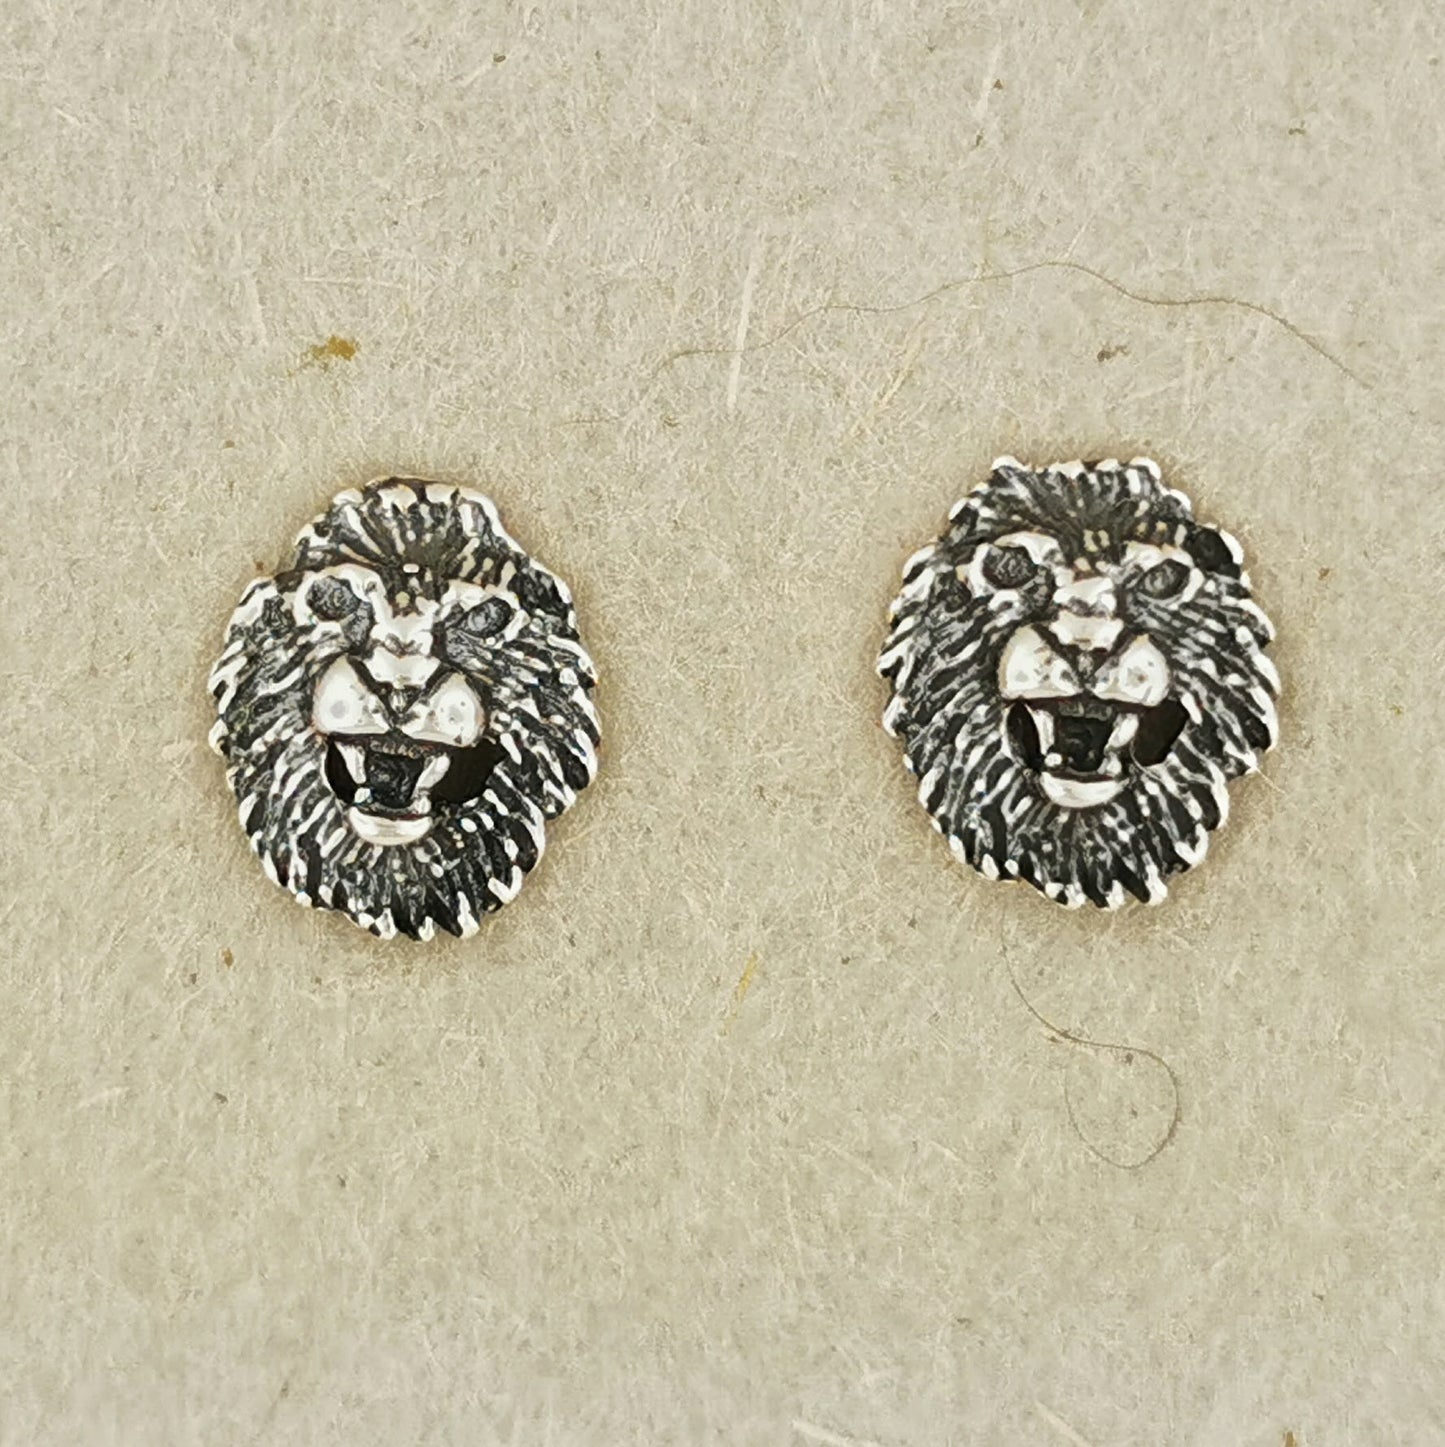 Gold Lion Head Stud Earrings Made to Order, Gold LIon Head Stud Earrings, Gold Lion Earrings, Gold Lion Head Earrings, Gold Lion Stud Earrings, Vintage Lion Earrings, Vintage Lion Stud Earrings, Vintage Lion Studs, Gold Stud Earrings, Gold Animal Earrings, Gold Animal Studs, Gold Animal Stud Earrings, Animal Lover Studs, Animal Lover Stud Earrings In Gold